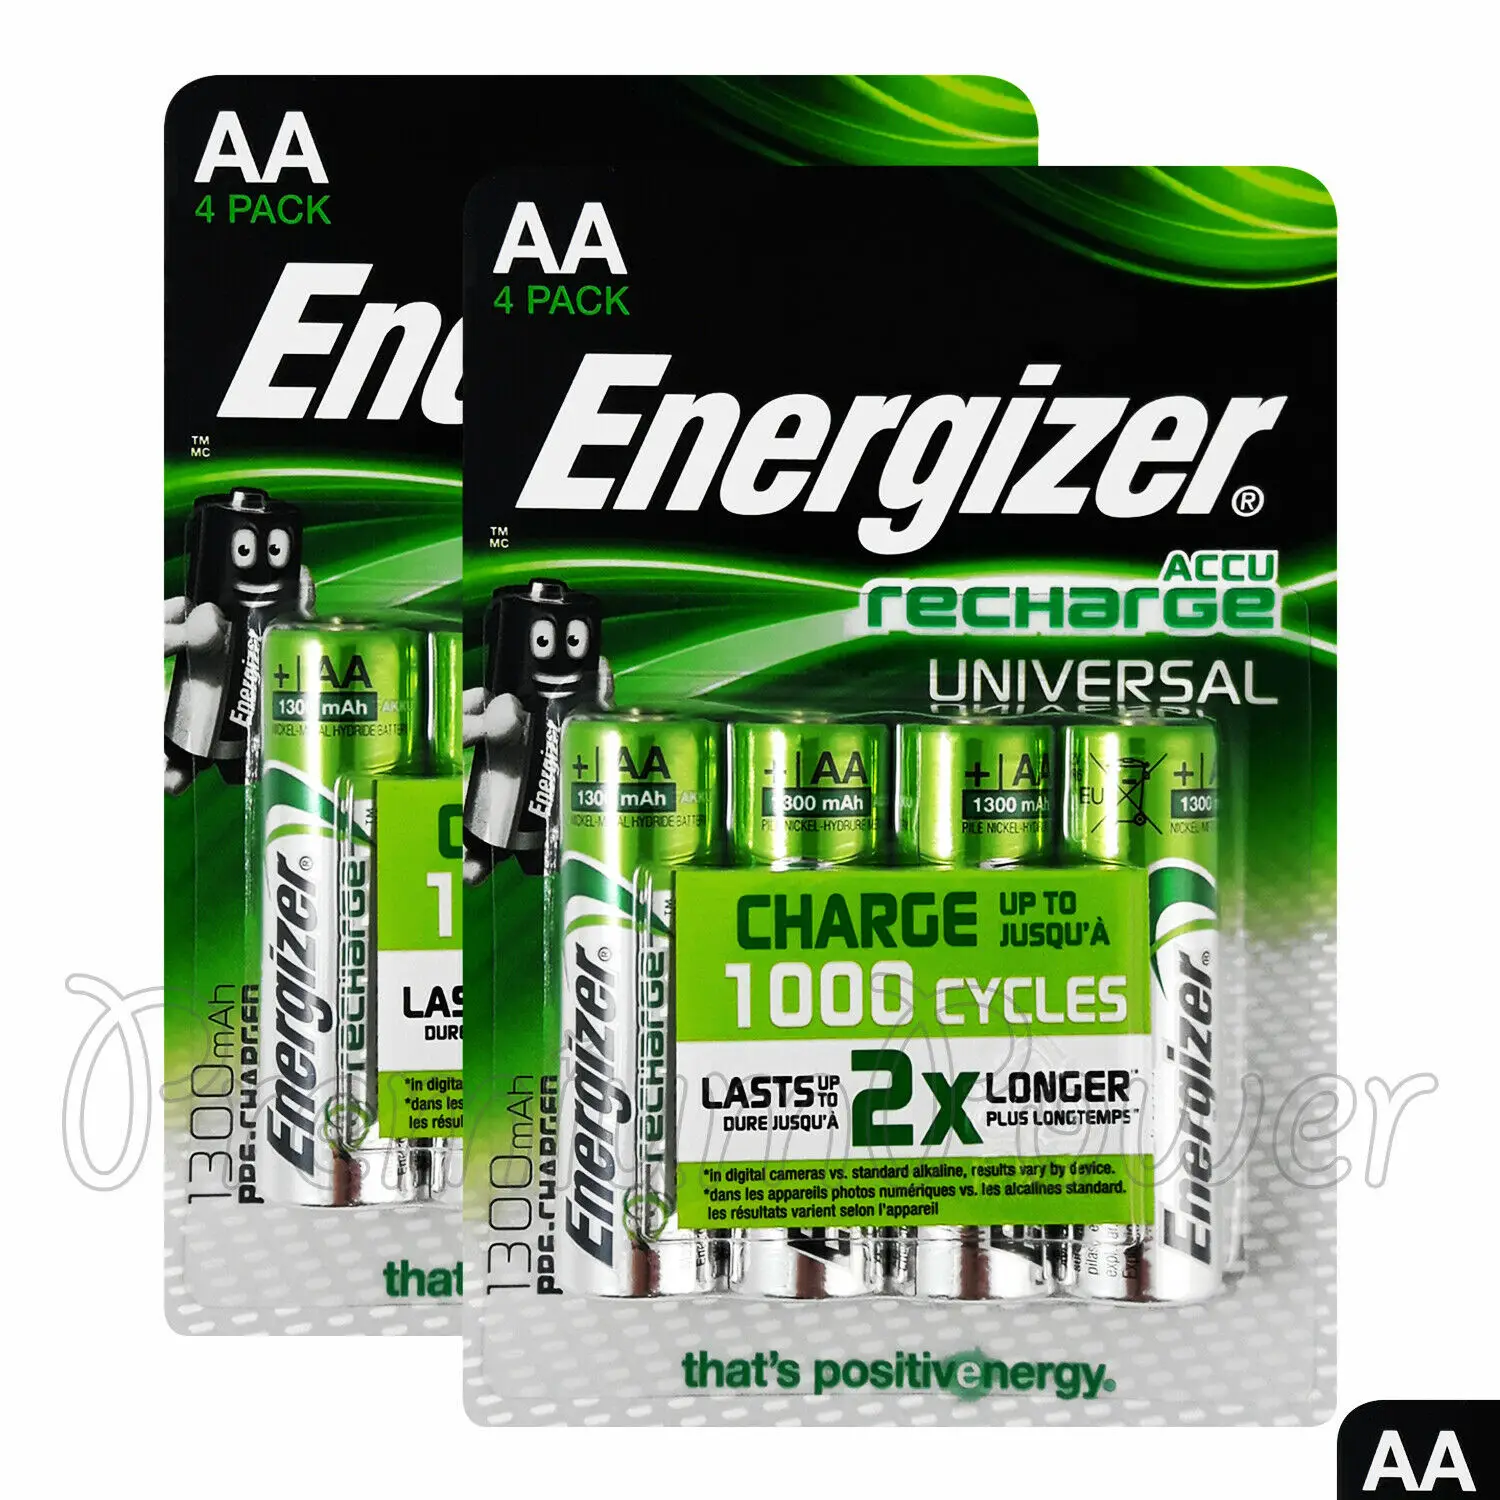 

8 x Energizer Rechargeable AA batteries Universal 1300 mAh Accu NiMh Pack of 4